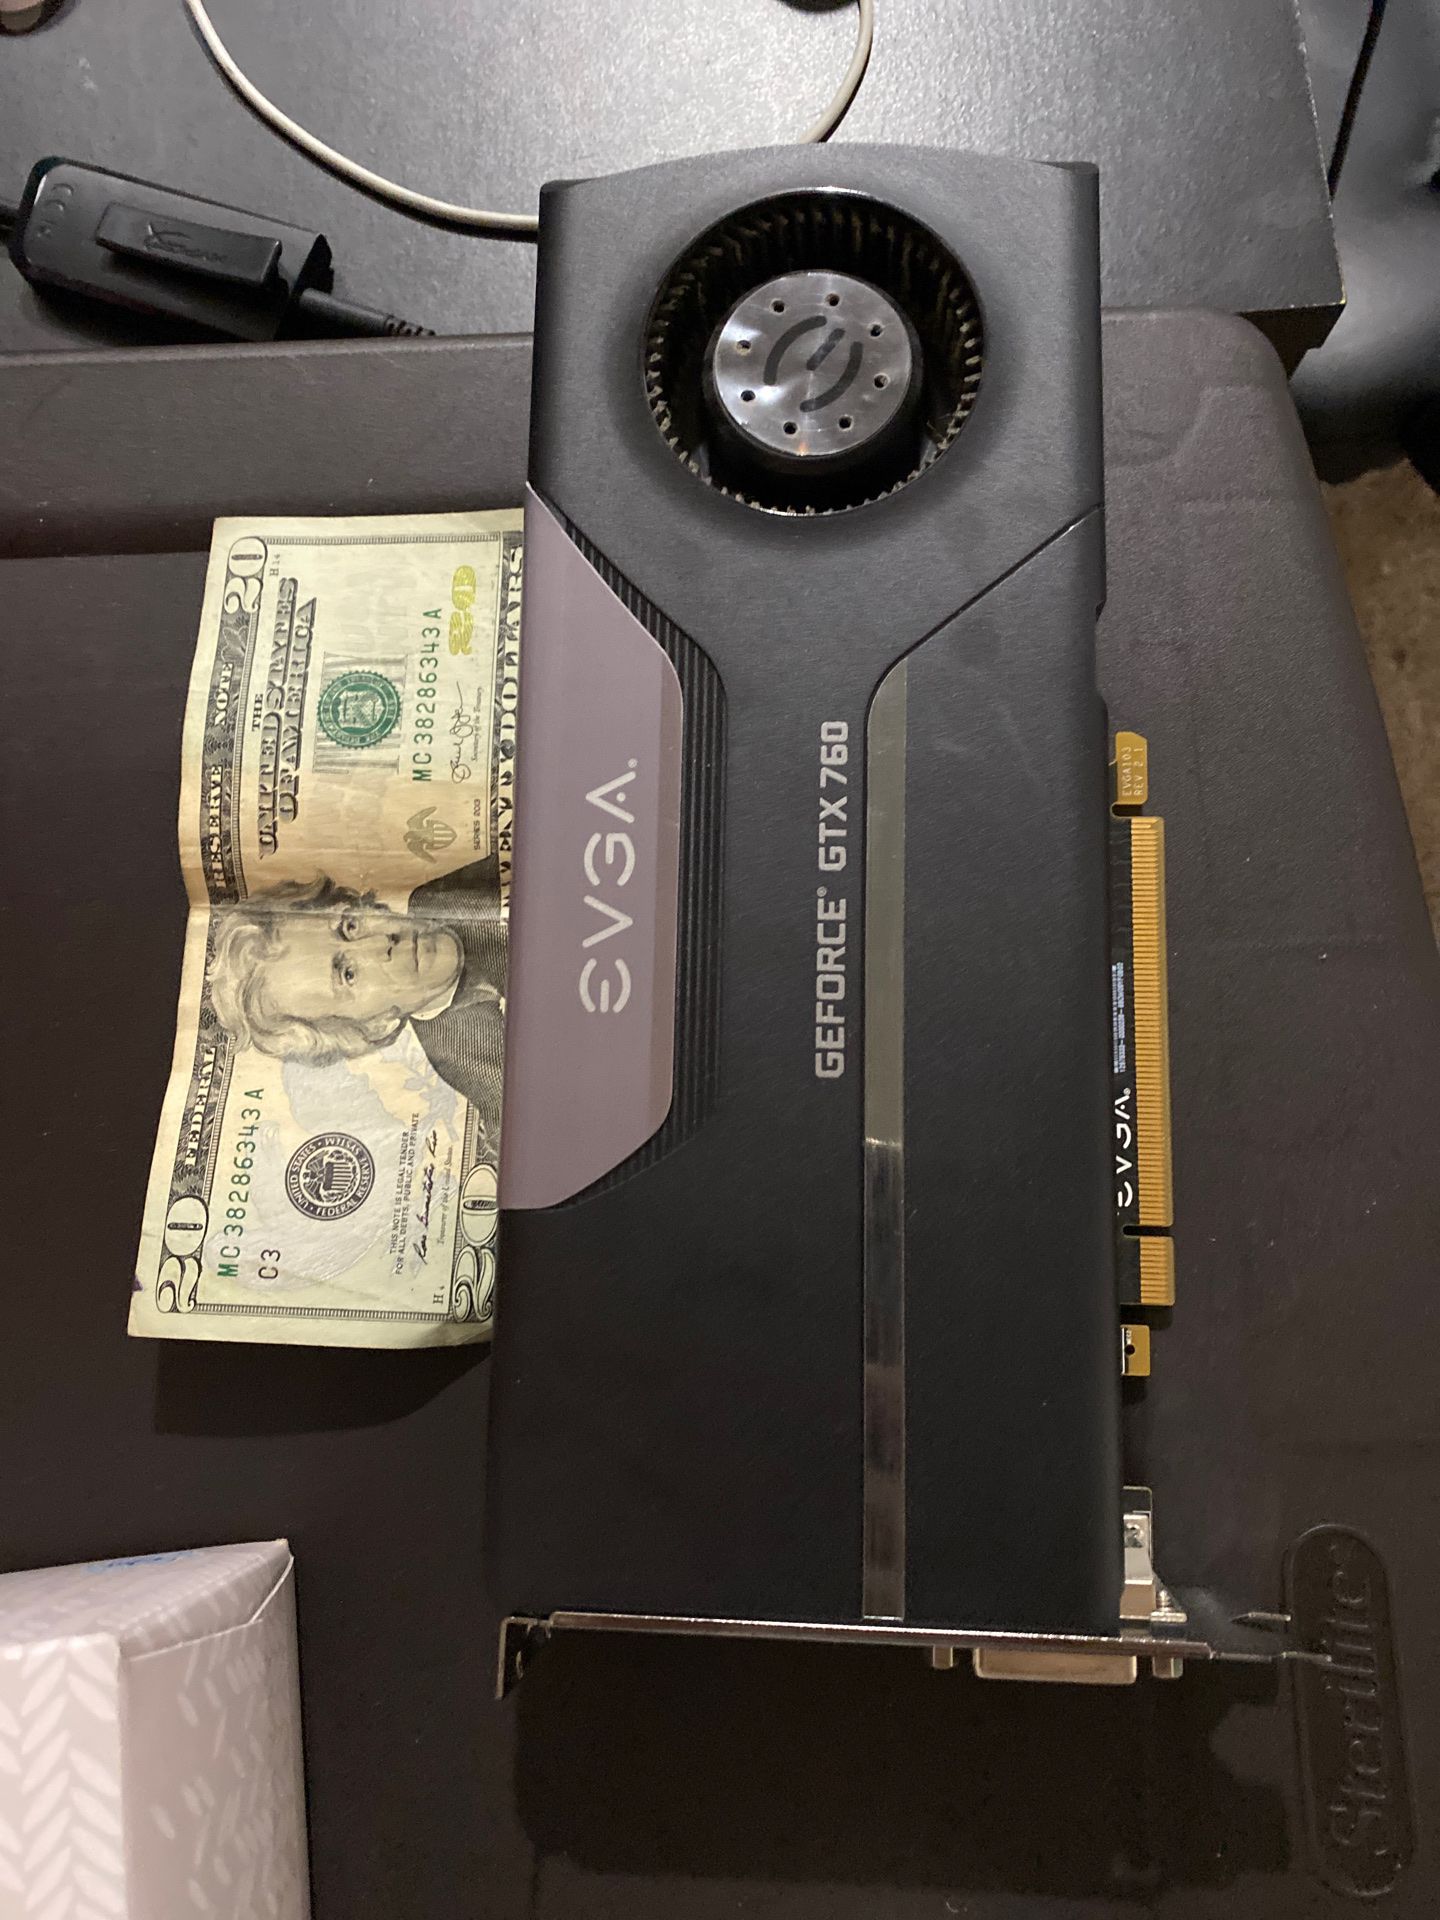 Gtx 760 and $20